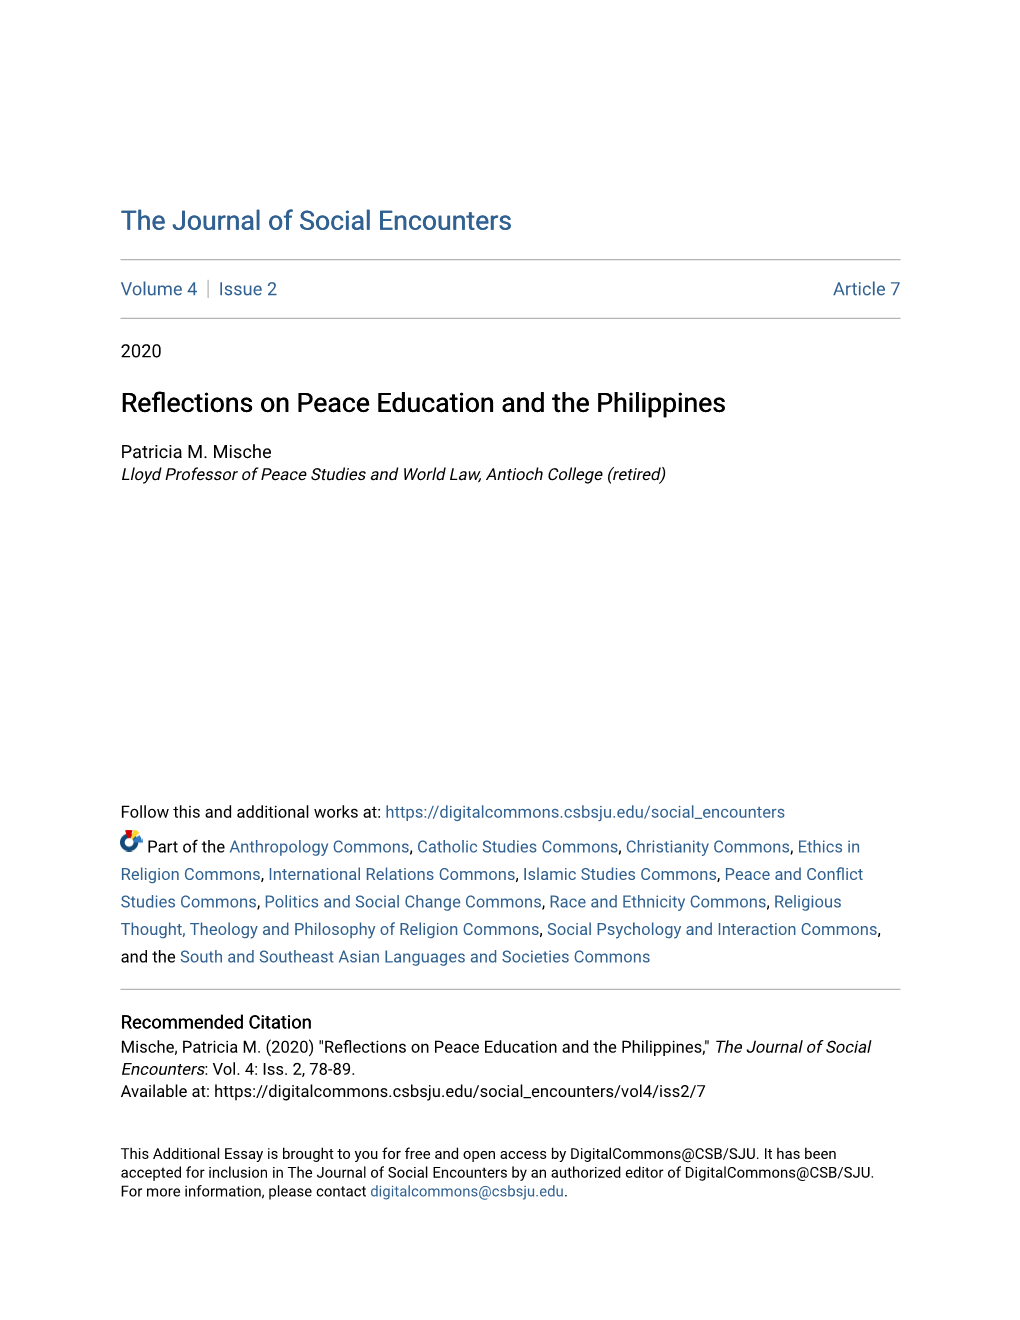 Reflections on Peace Education and the Philippines," the Journal of Social Encounters: Vol